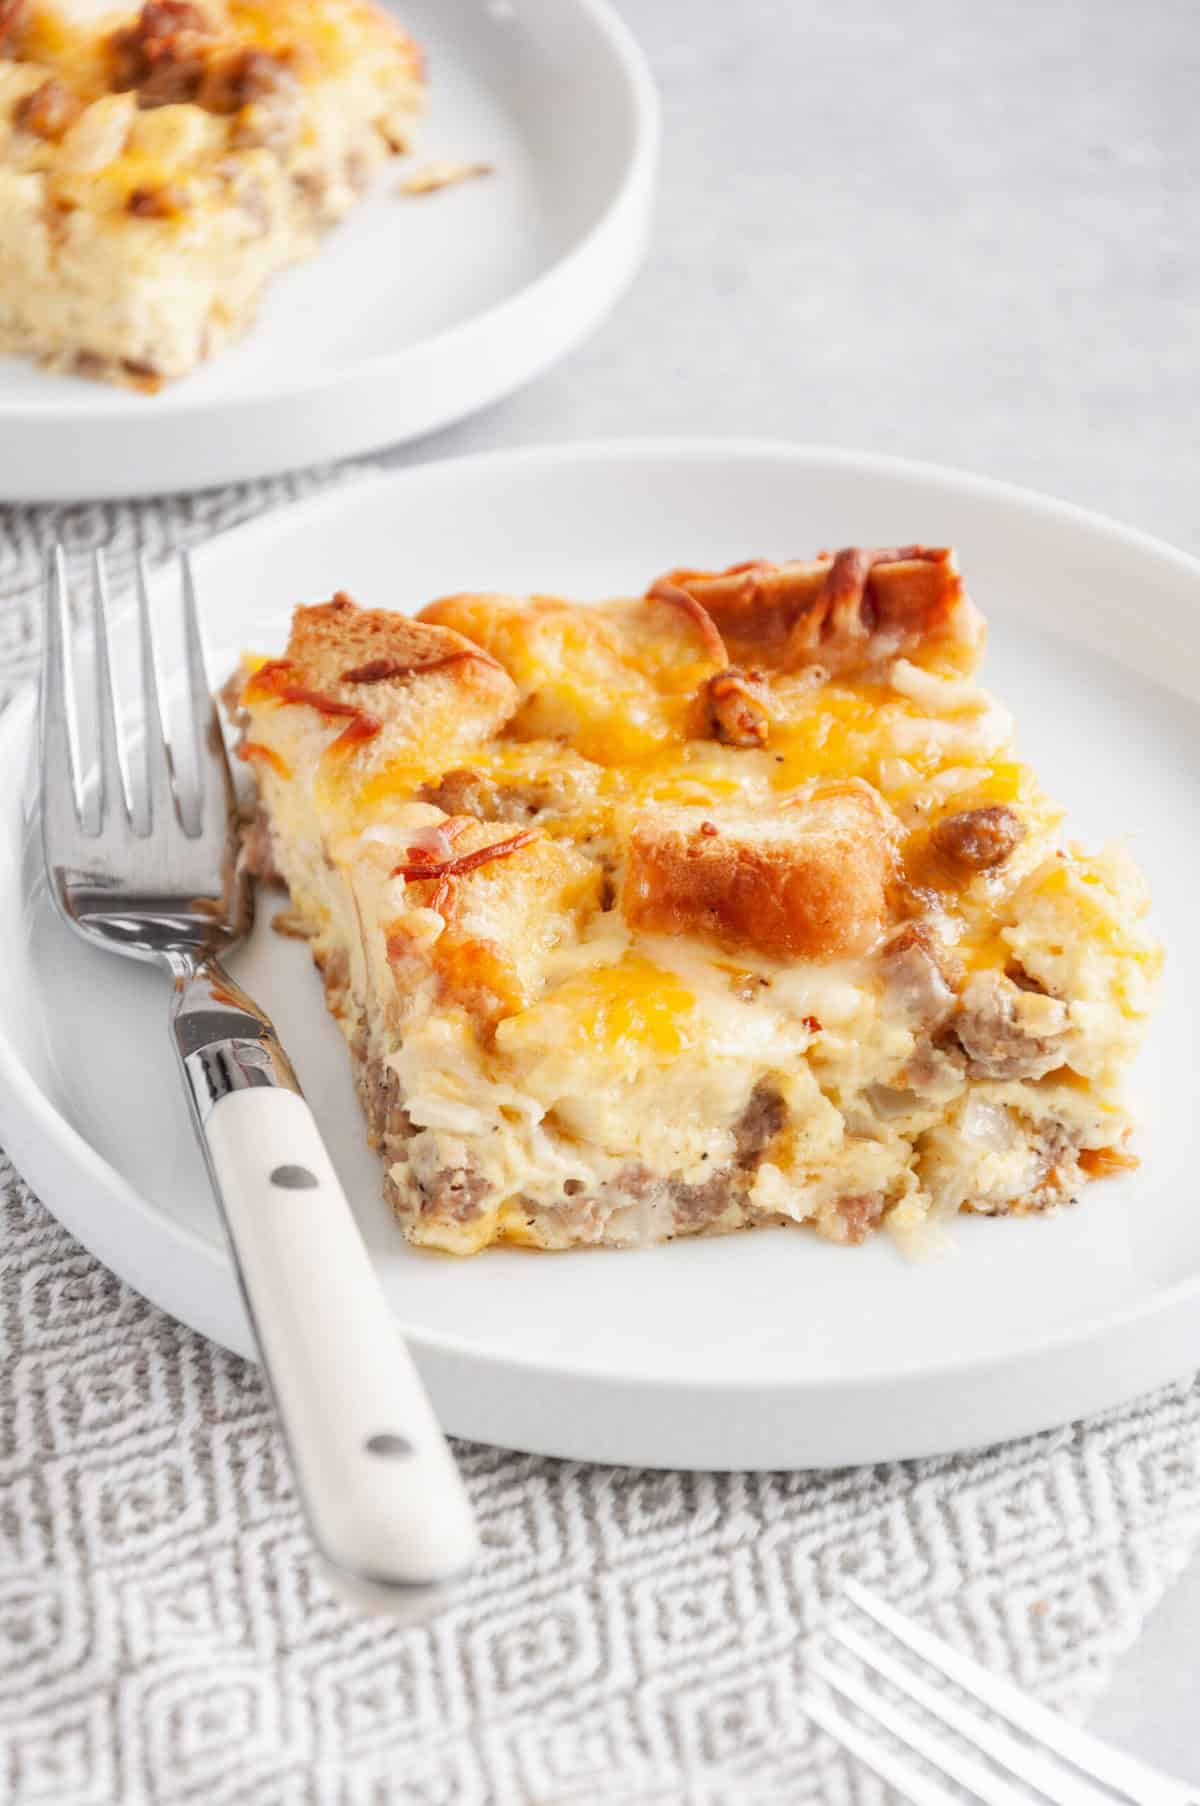 slice serving of breakfast casserole with bread served on a plate